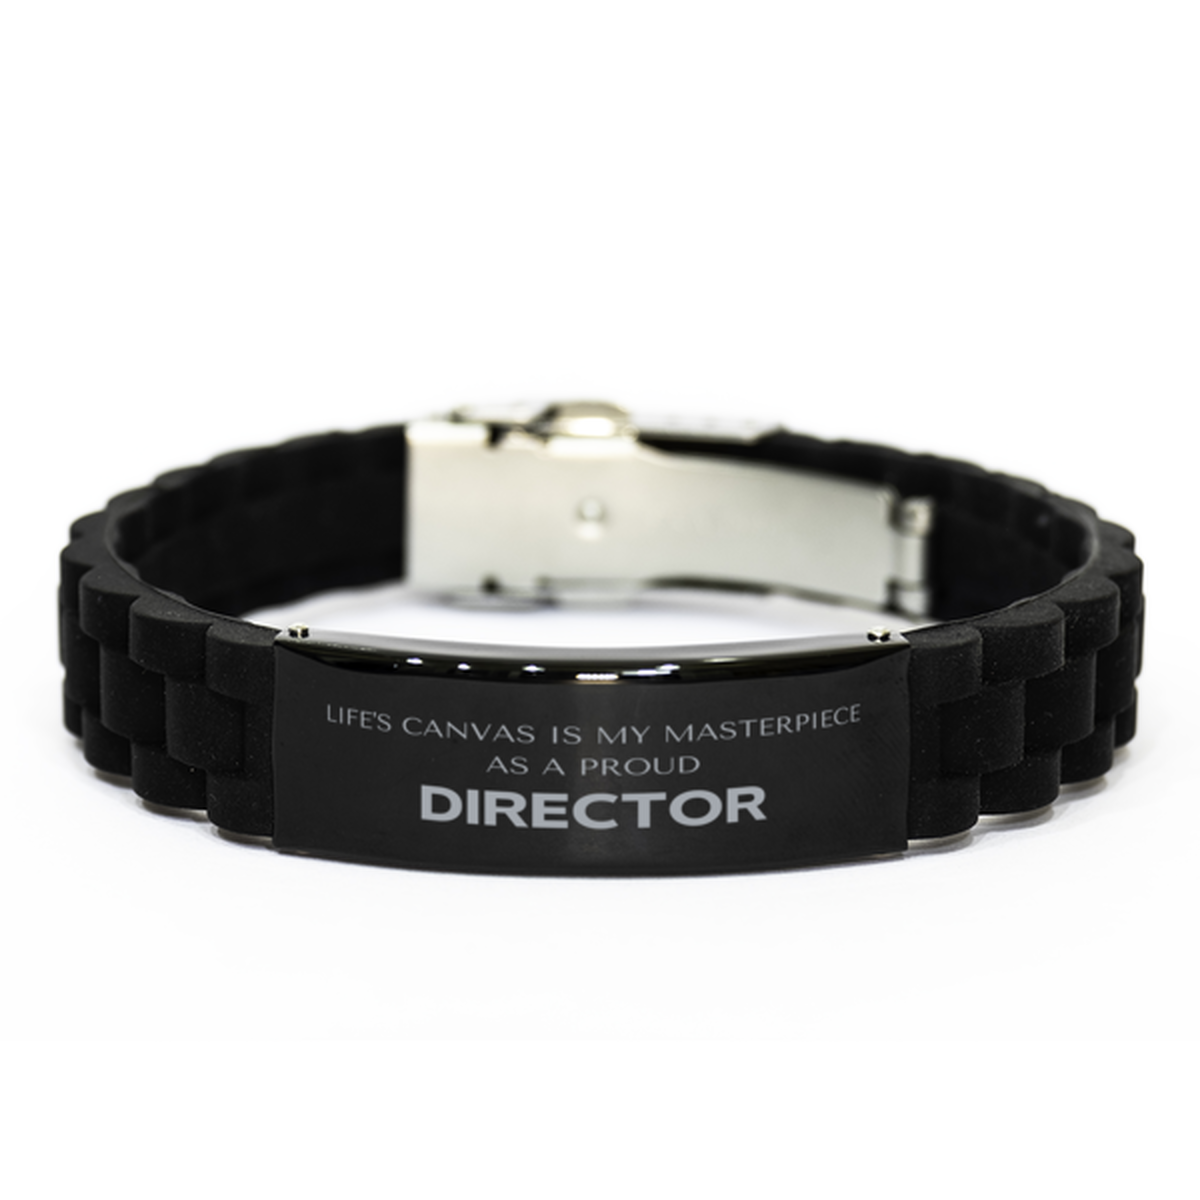 Proud Director Gifts, Life's canvas is my masterpiece, Epic Birthday Christmas Unique Black Glidelock Clasp Bracelet For Director, Coworkers, Men, Women, Friends